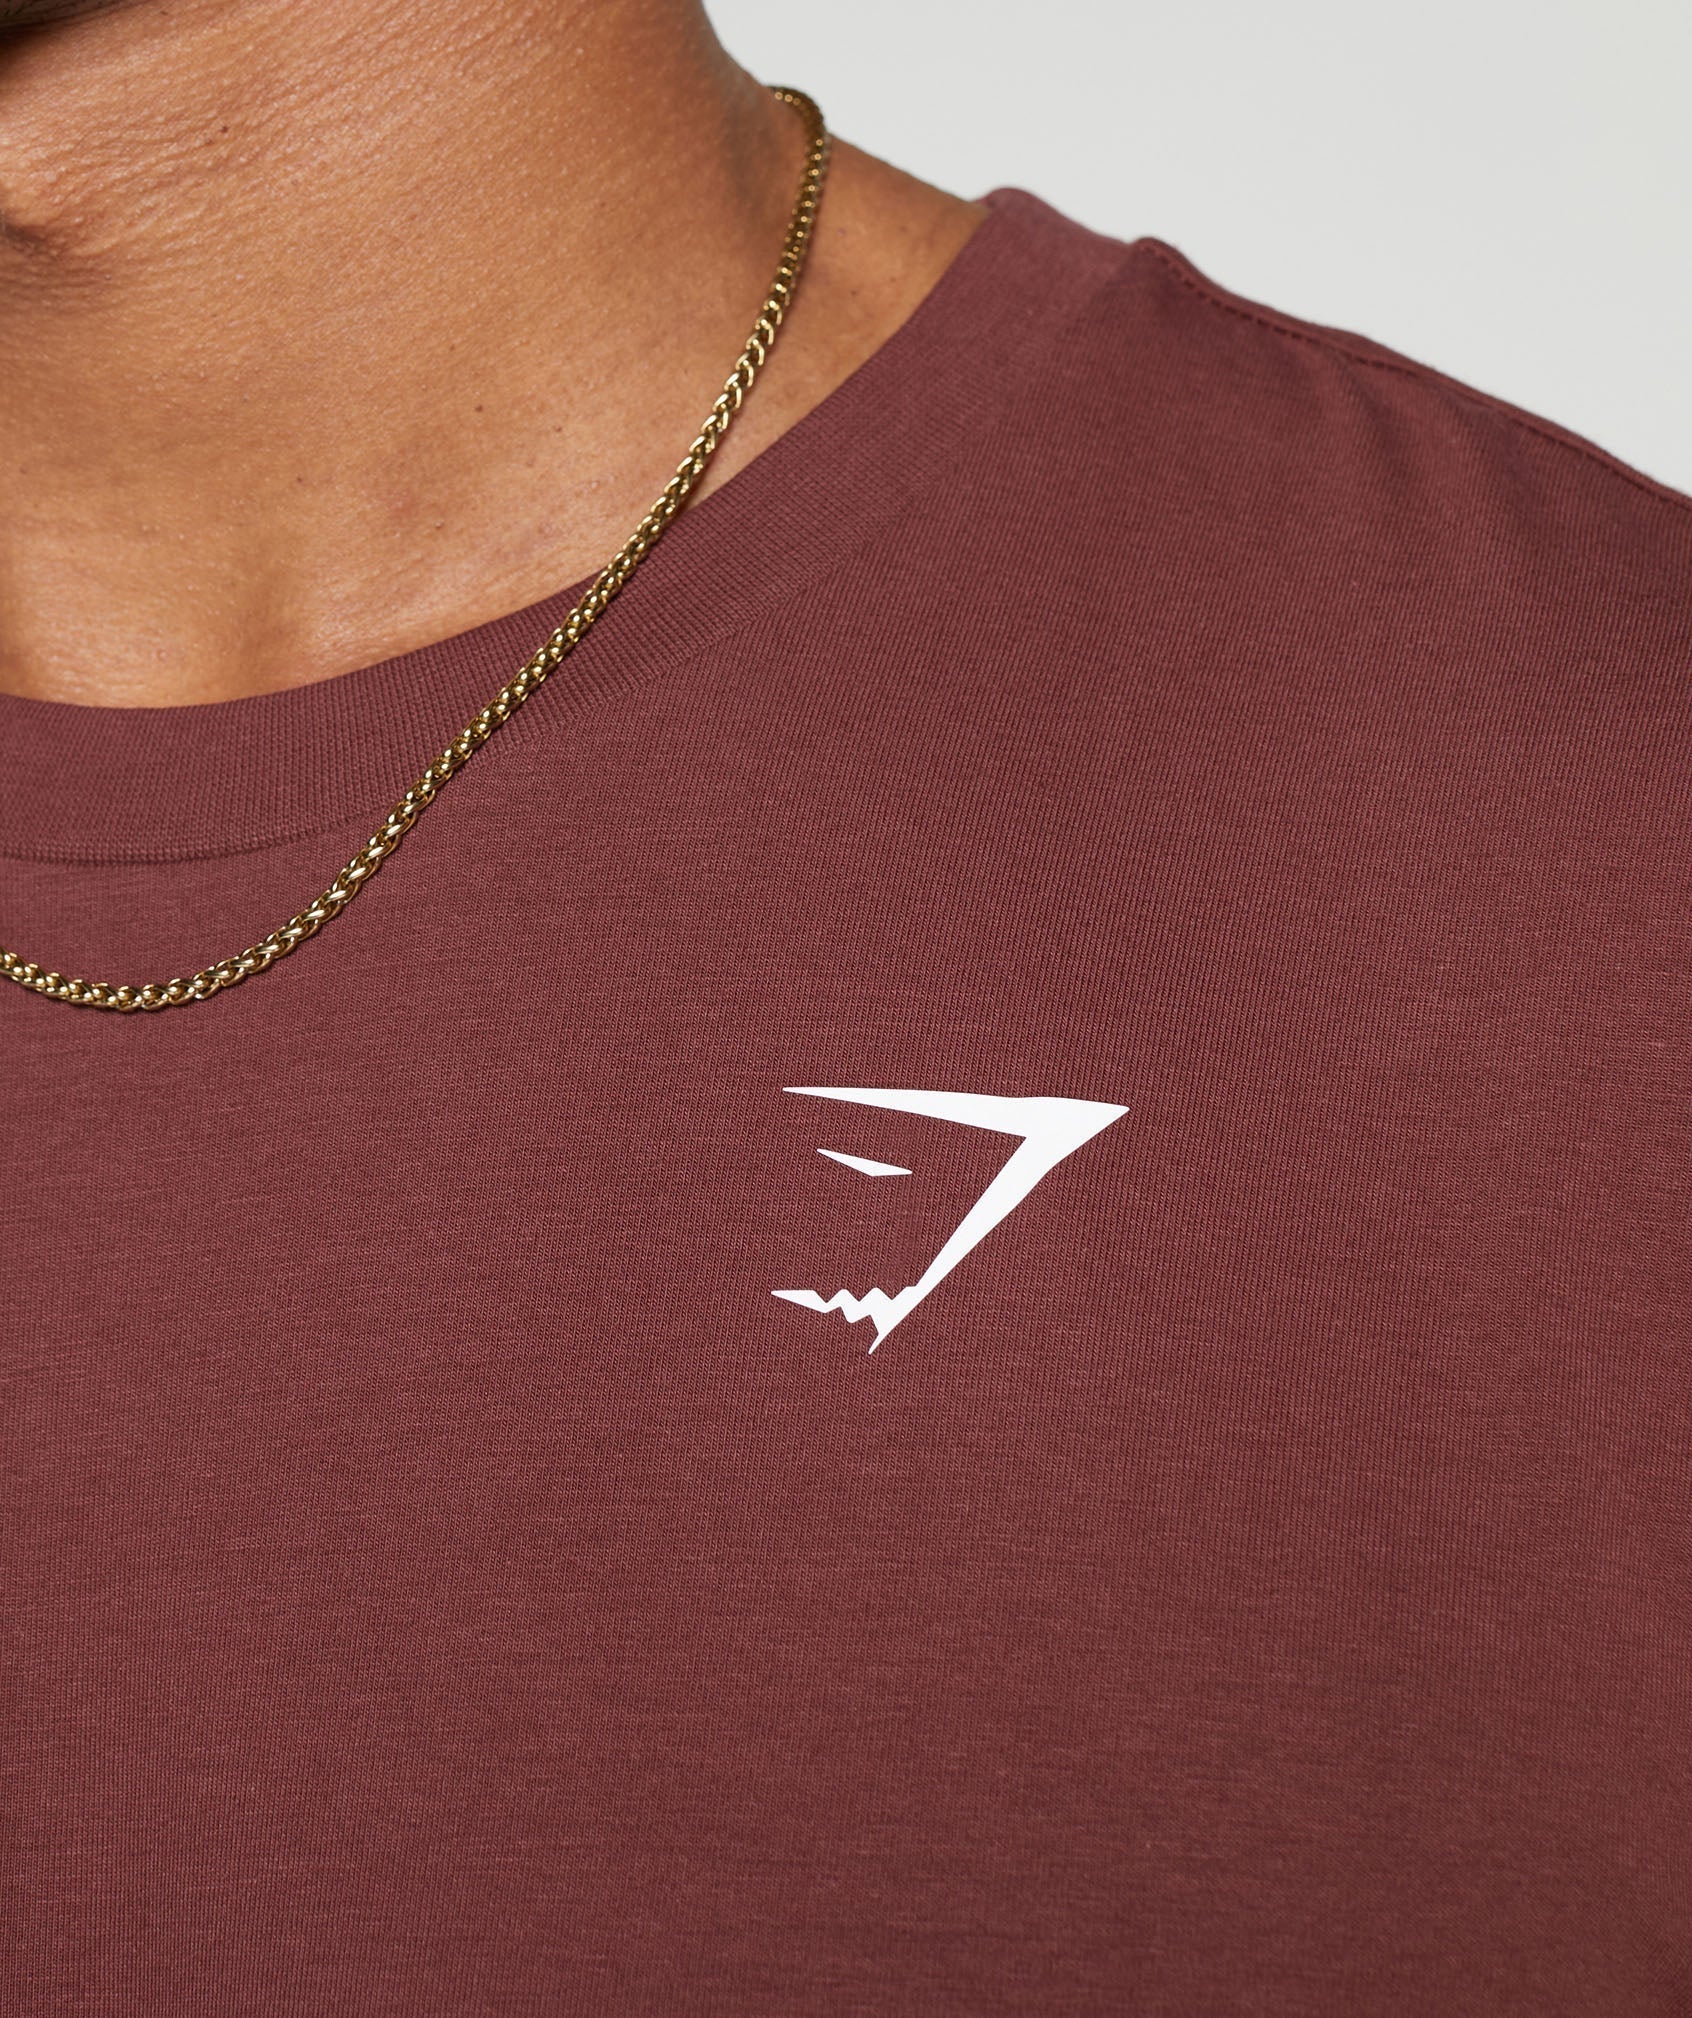 Essential Oversized T-Shirt in Burgundy Brown - view 5